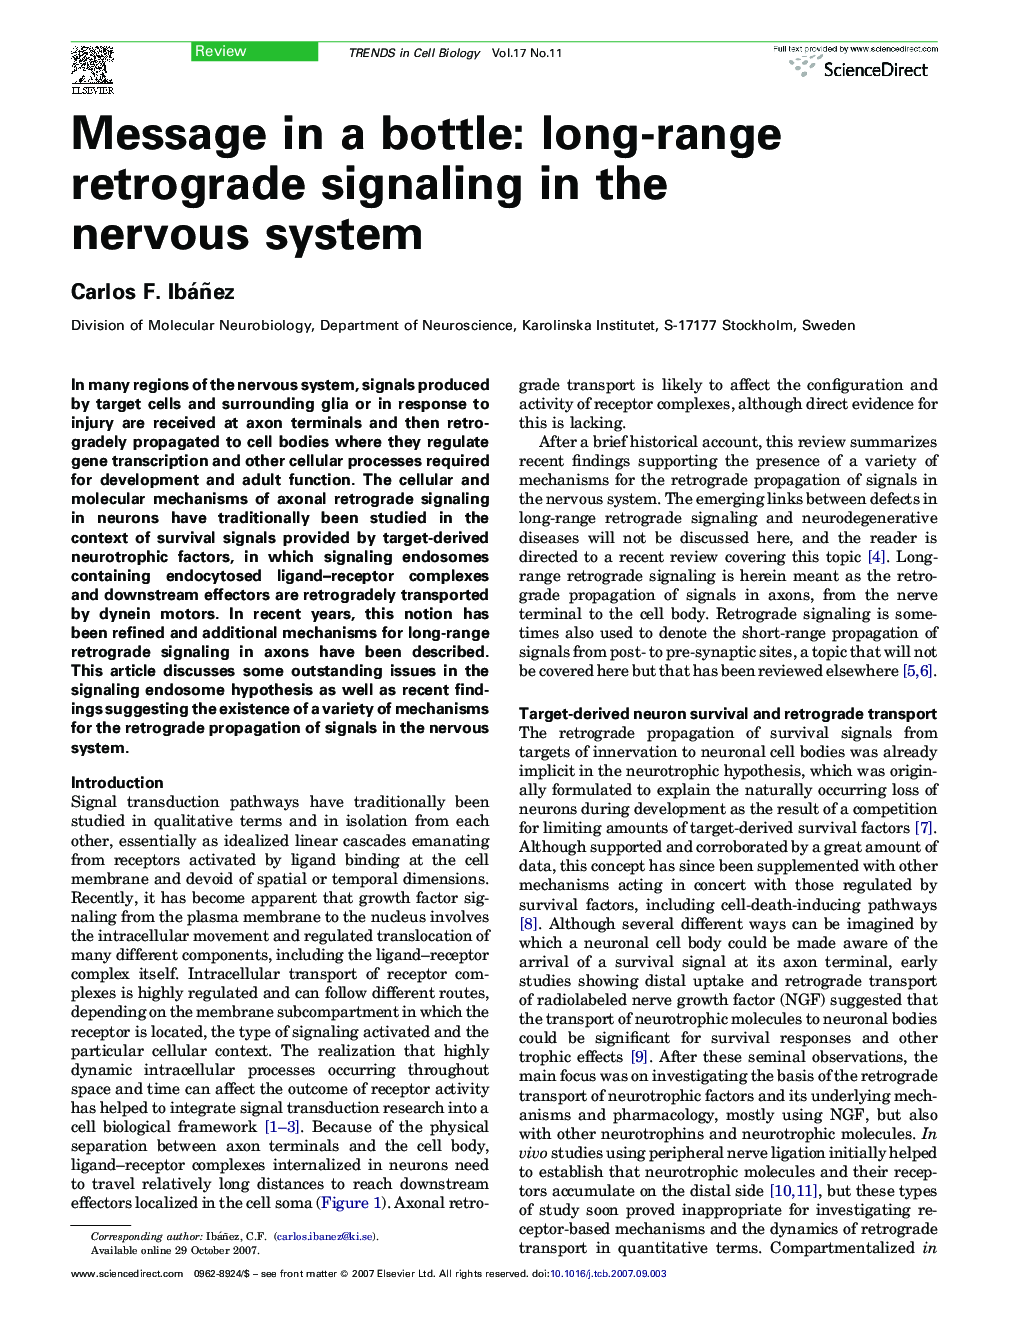 Message in a bottle: long-range retrograde signaling in the nervous system